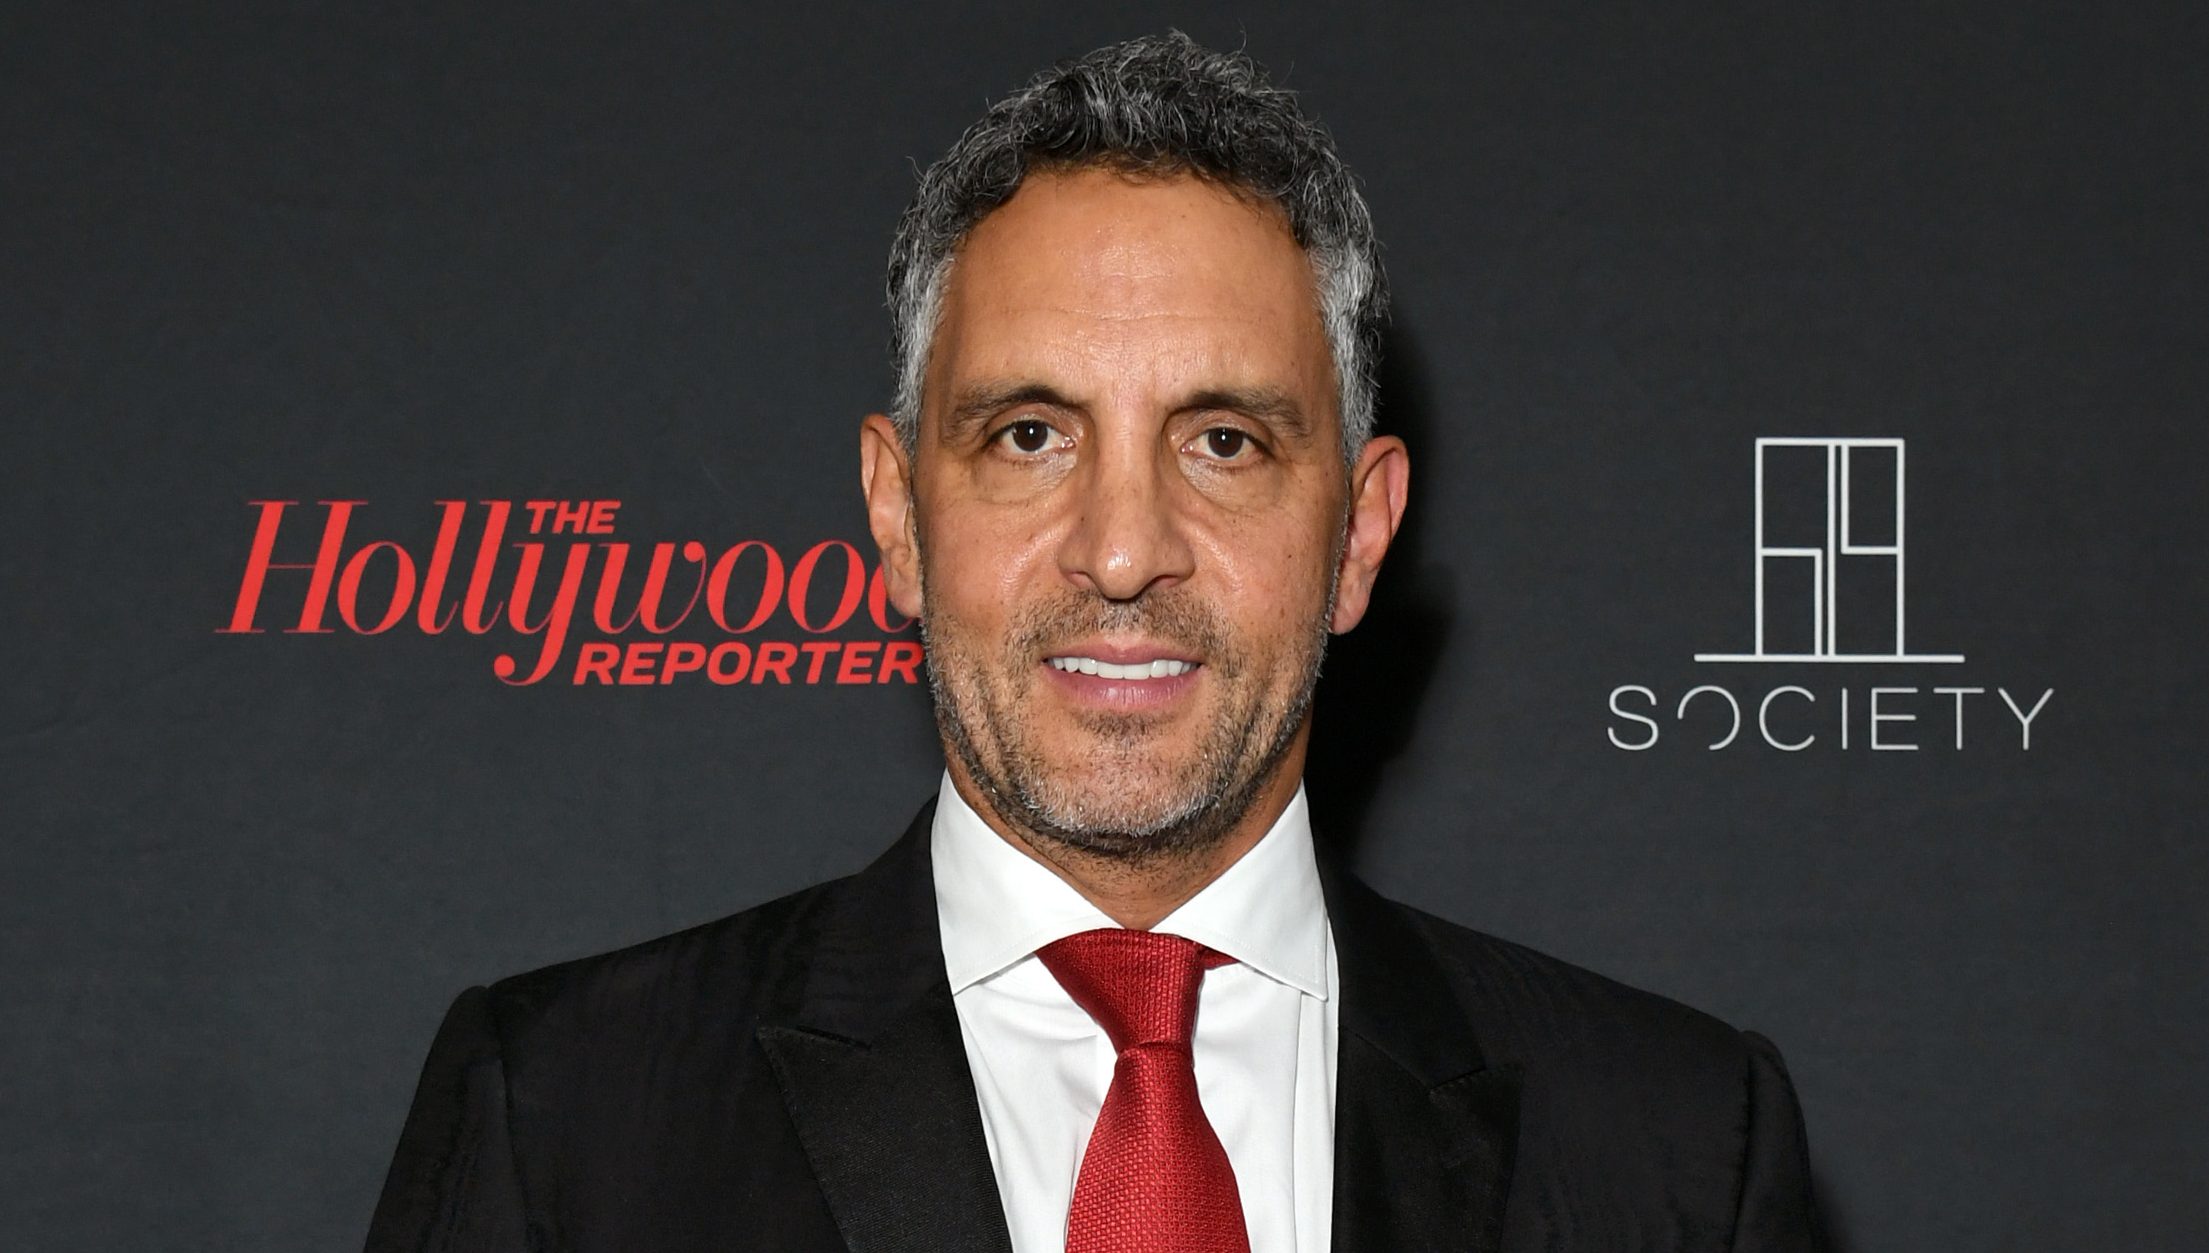 LOS ANGELES, CALIFORNIA - SEPTEMBER 27: Mauricio Umansky attends The Hollywood Reporter Los Angeles Power Broker Awards presented by The SOCIETY Group on September 27, 2023 in Los Angeles, California. (Photo by Jon Kopaloff/The Hollywood Reporter via Getty Images)